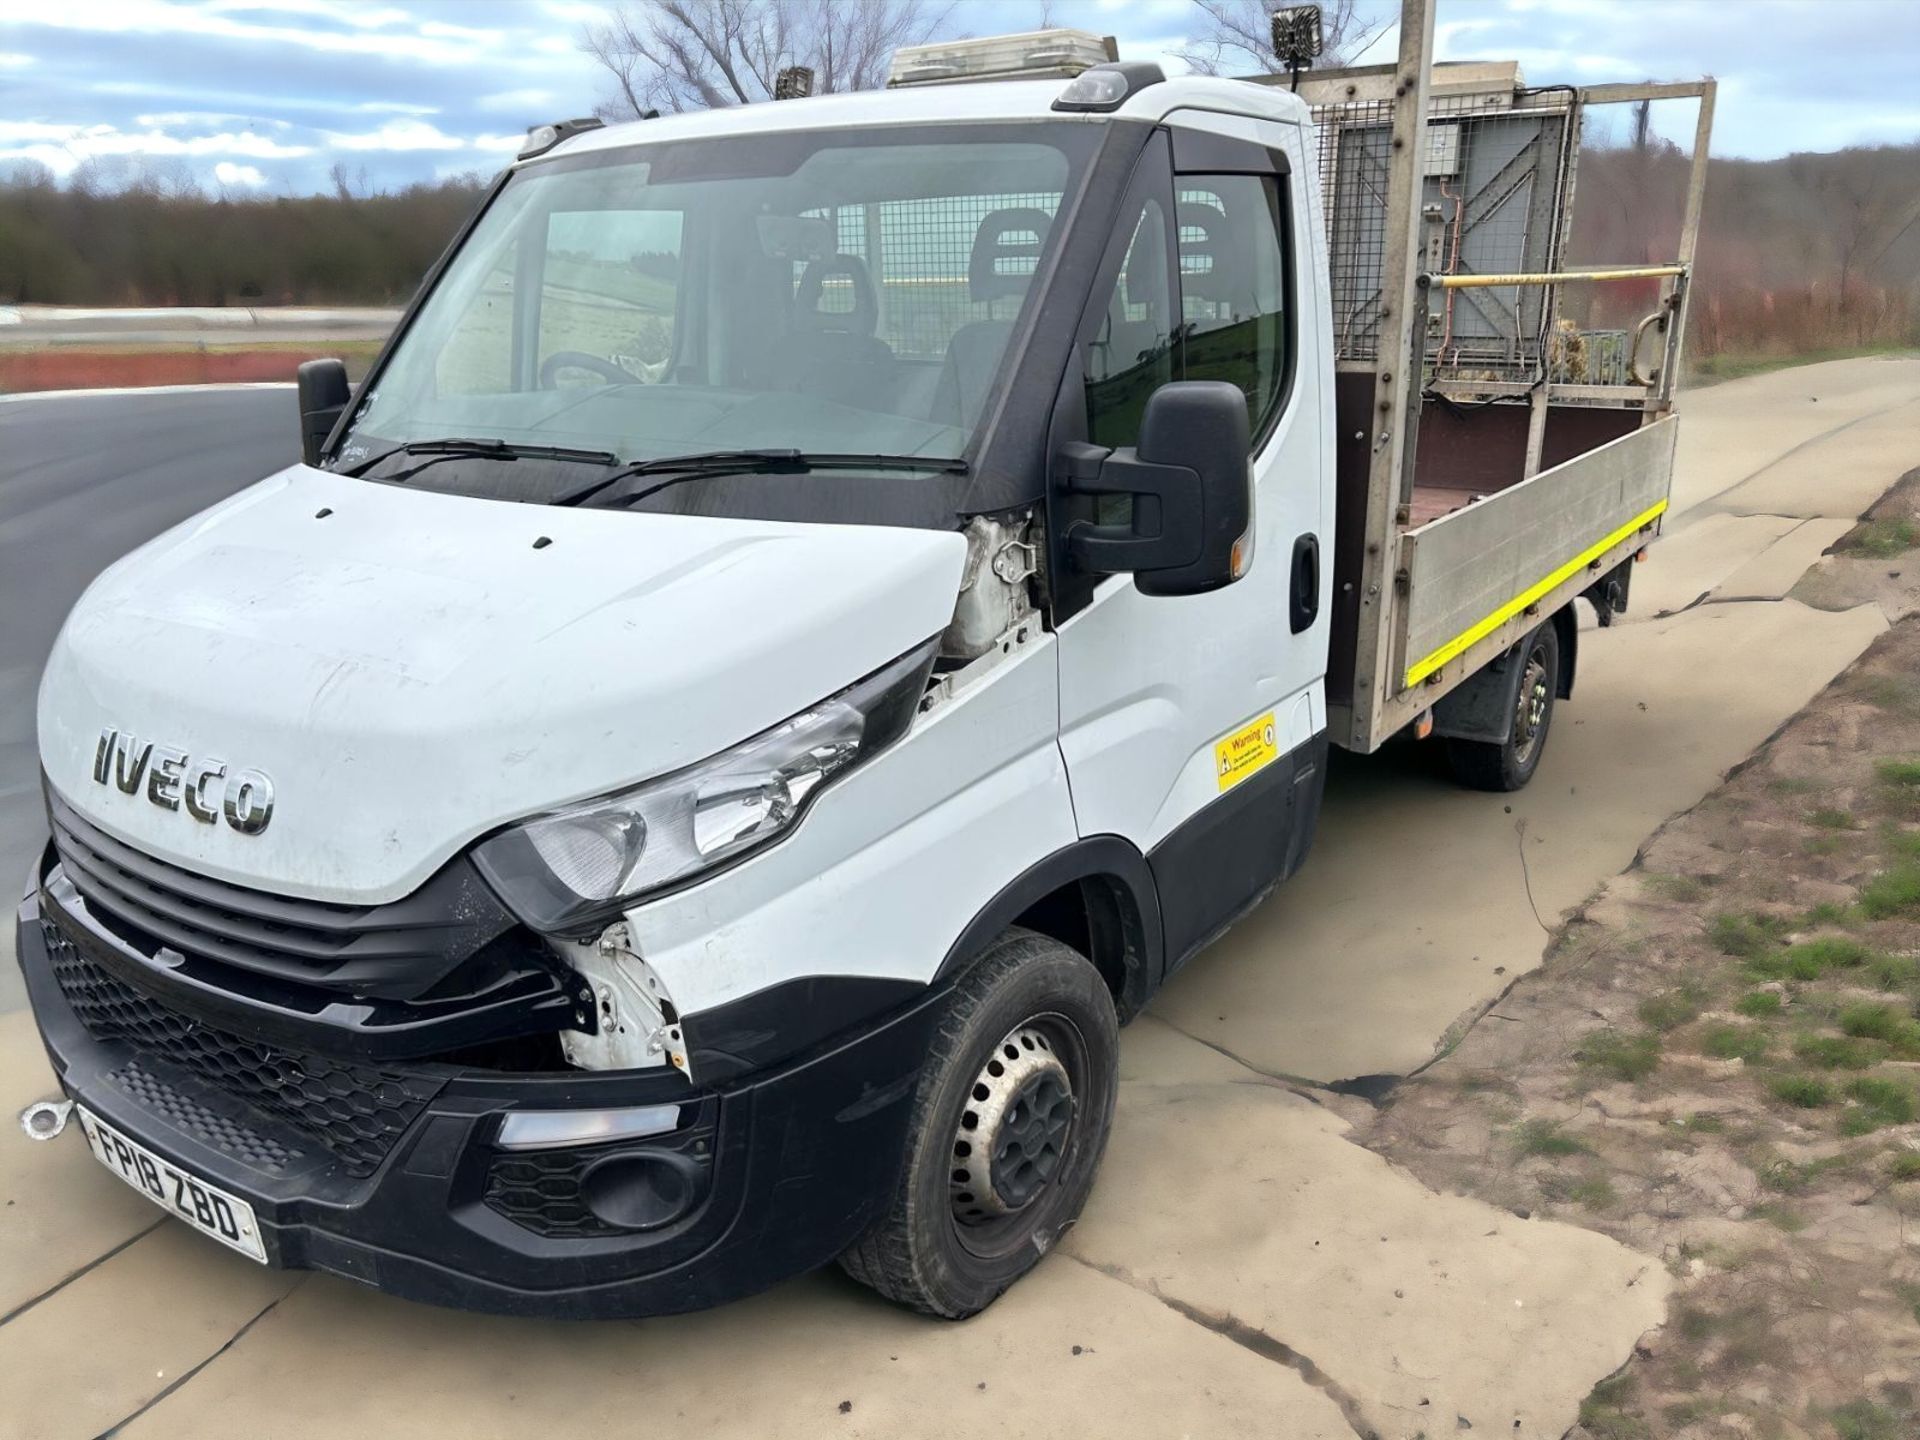 2018-18 REG IVECO DAILY DROPSIDE HI MATIC HPI CLEAR - Image 3 of 8